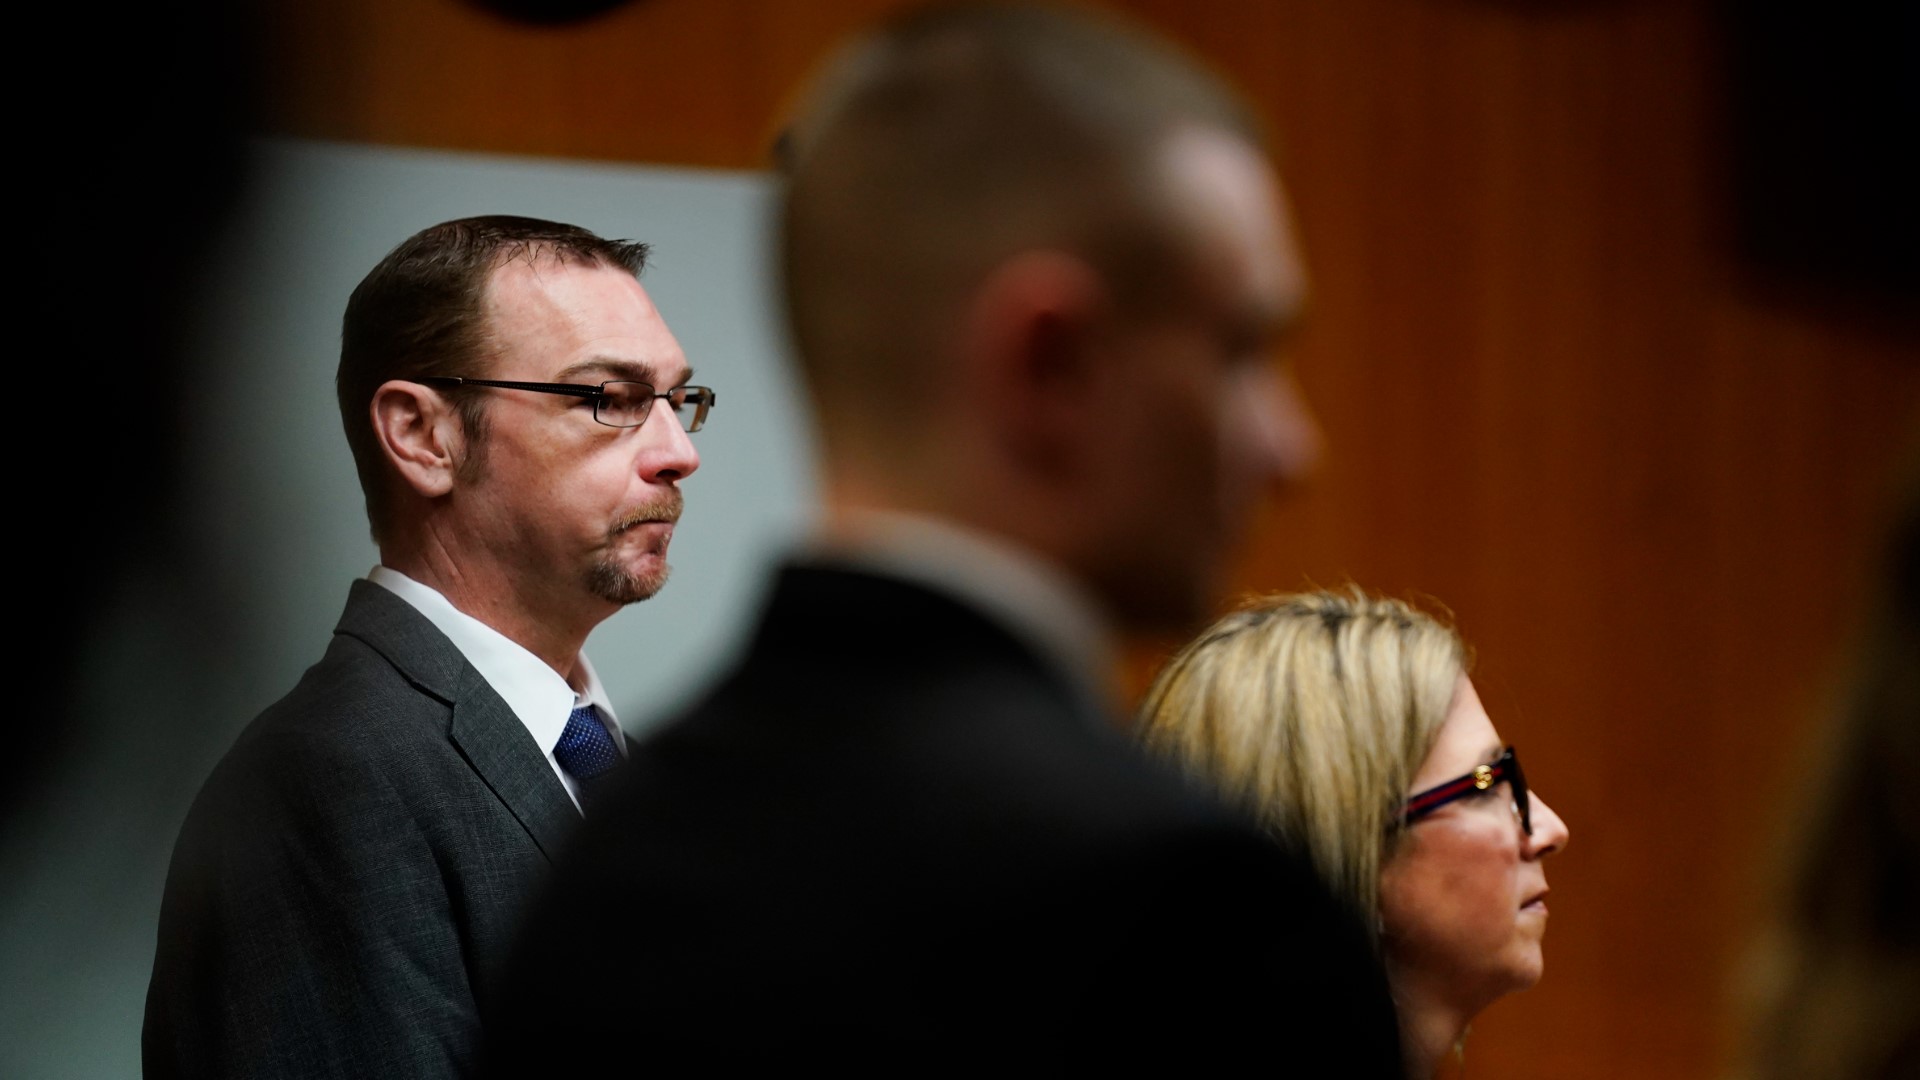 The jury verdict means James Crumbley joins his wife as a cause of the killing of four students at Oxford High School in 2021, even without pulling the trigger.